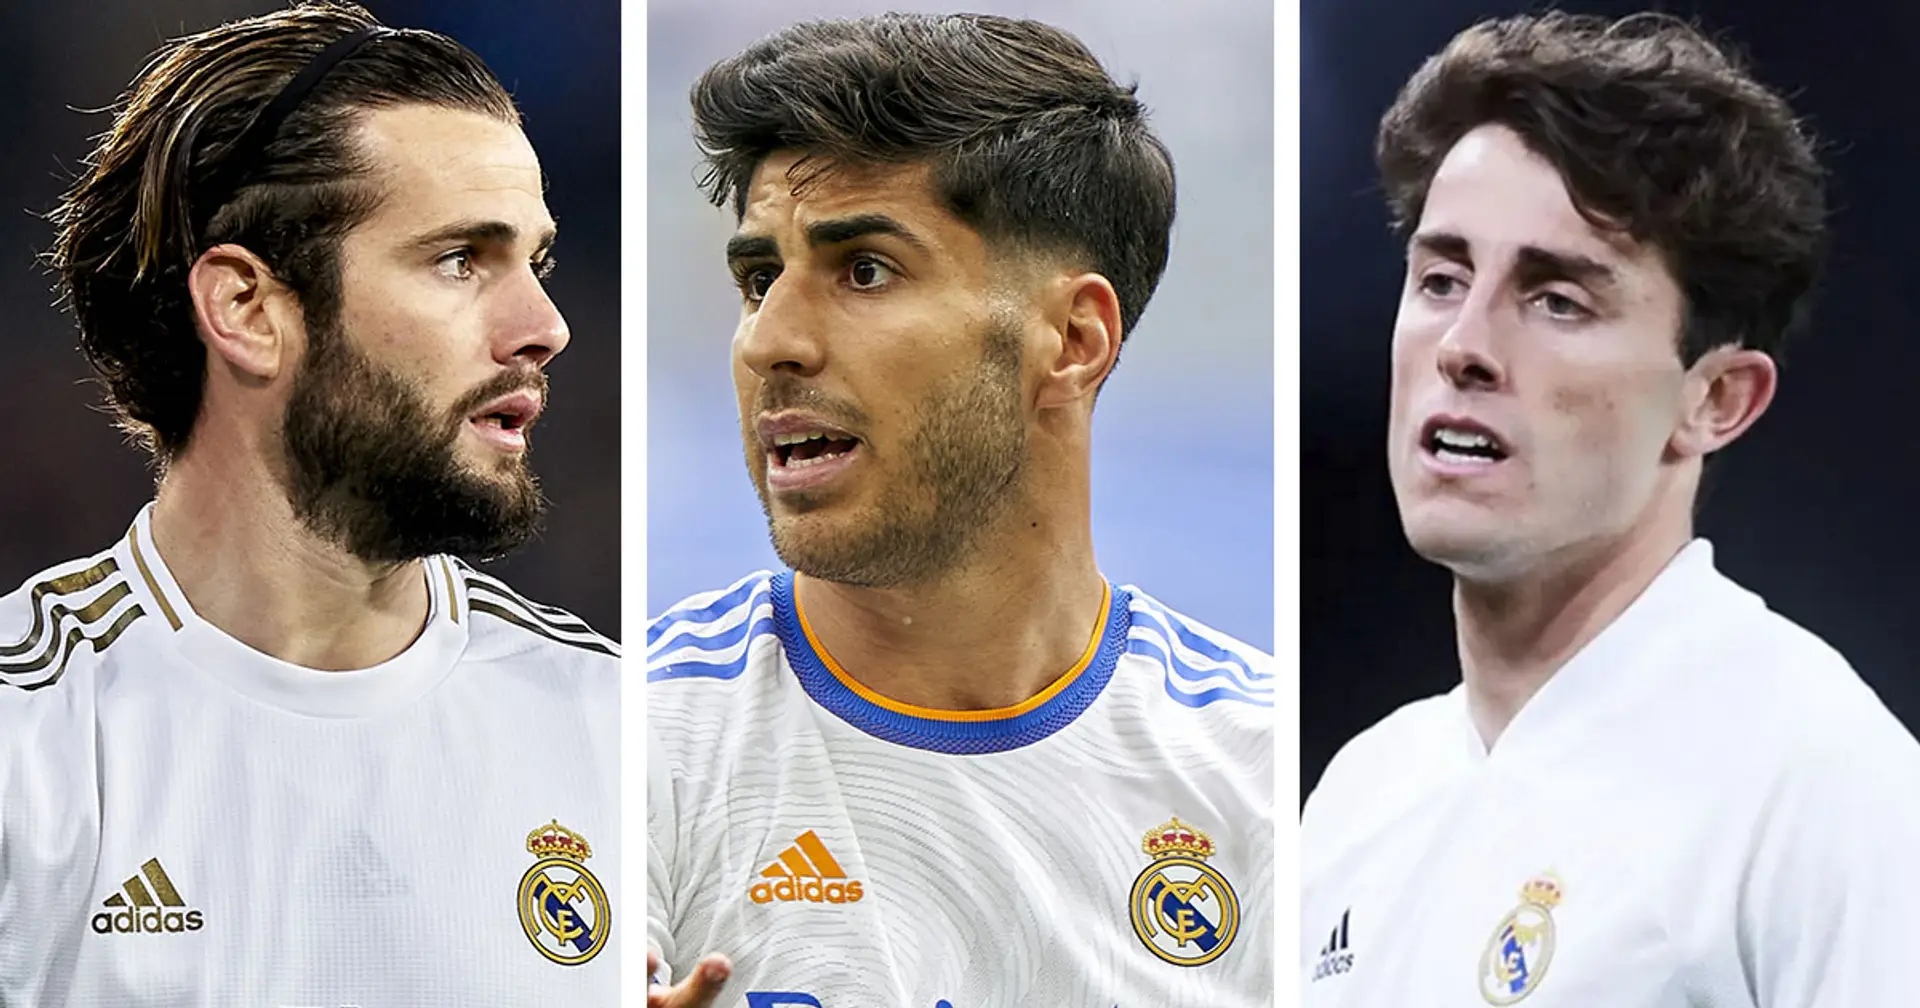 Asensio set to stay at Real Madrid and 2 more big stories you might've missed